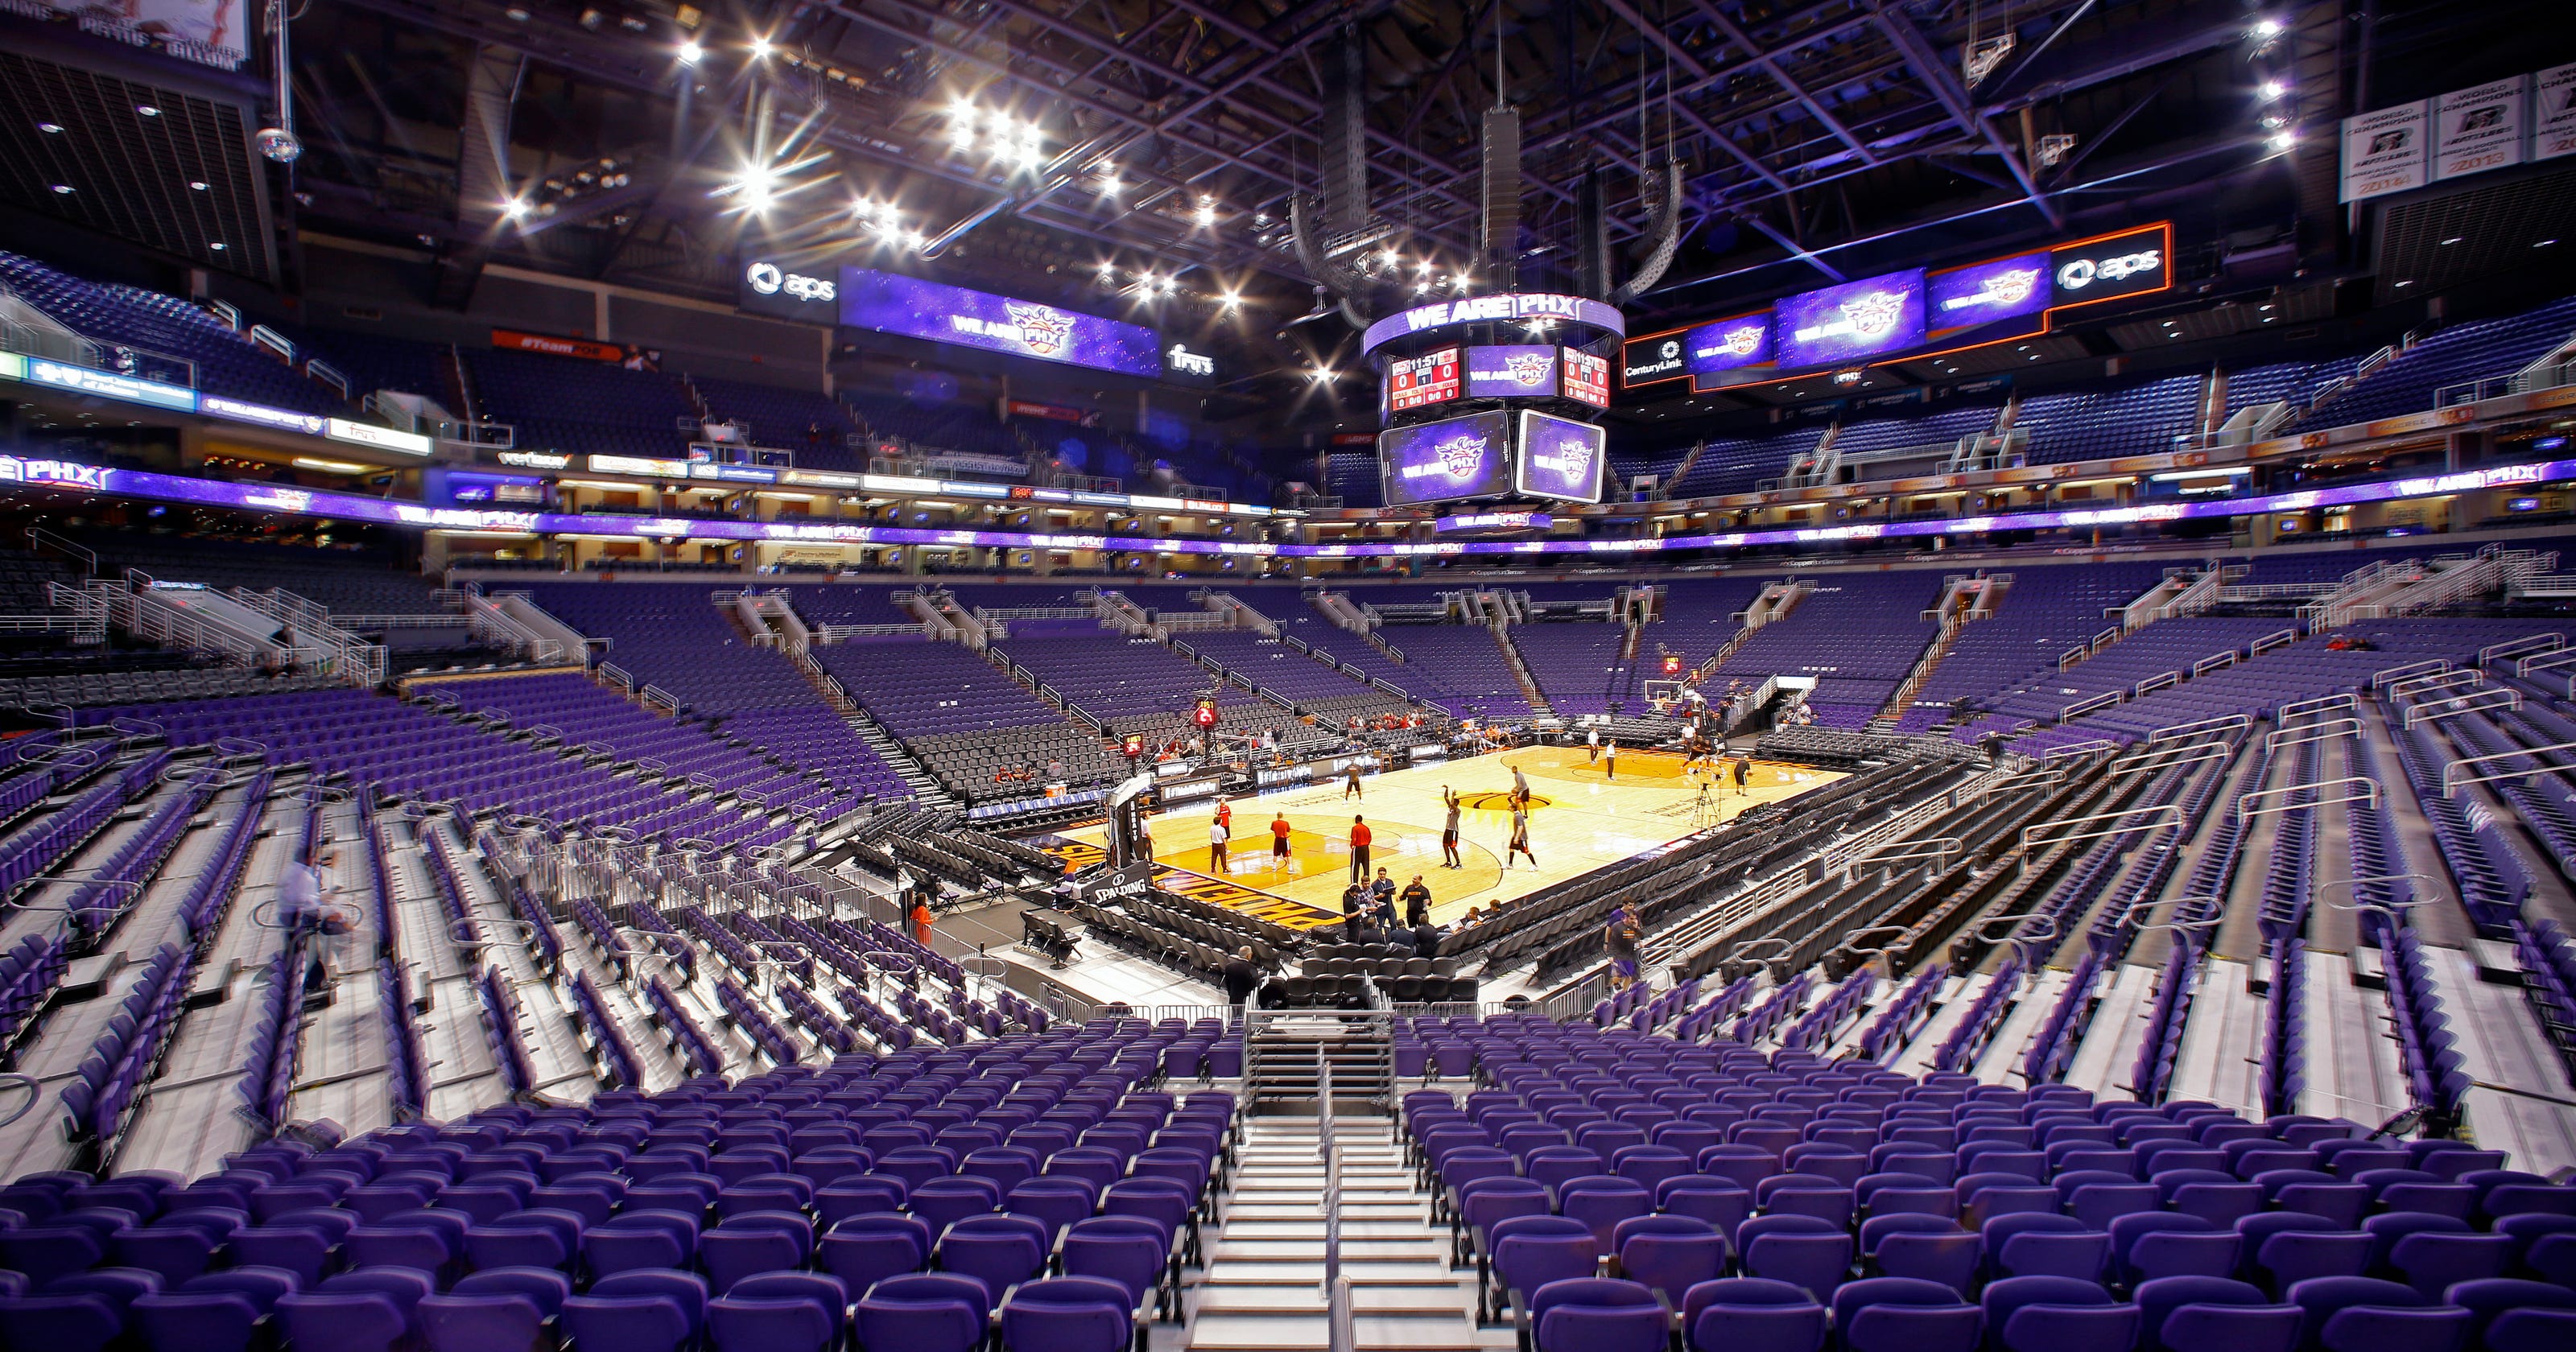 Goldwater, Phoenix go to court over Phoenix Suns arena records